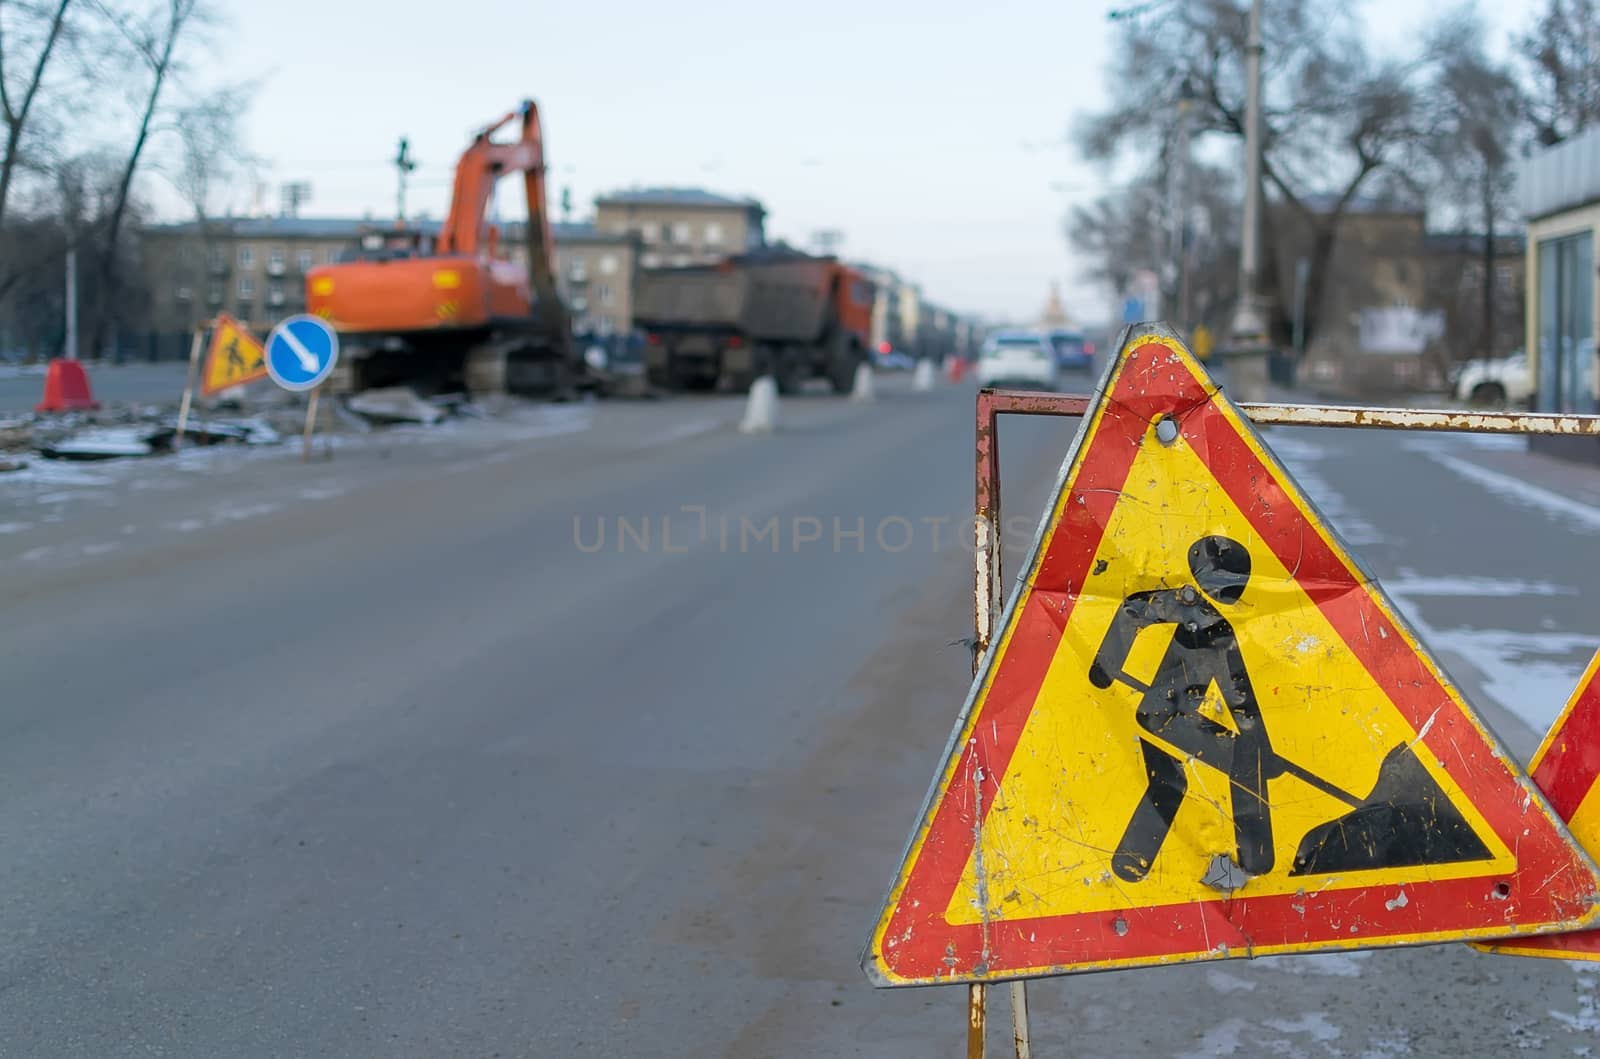 Traffic signs, detour, road repair and the excavator who digs the pit by jk3030